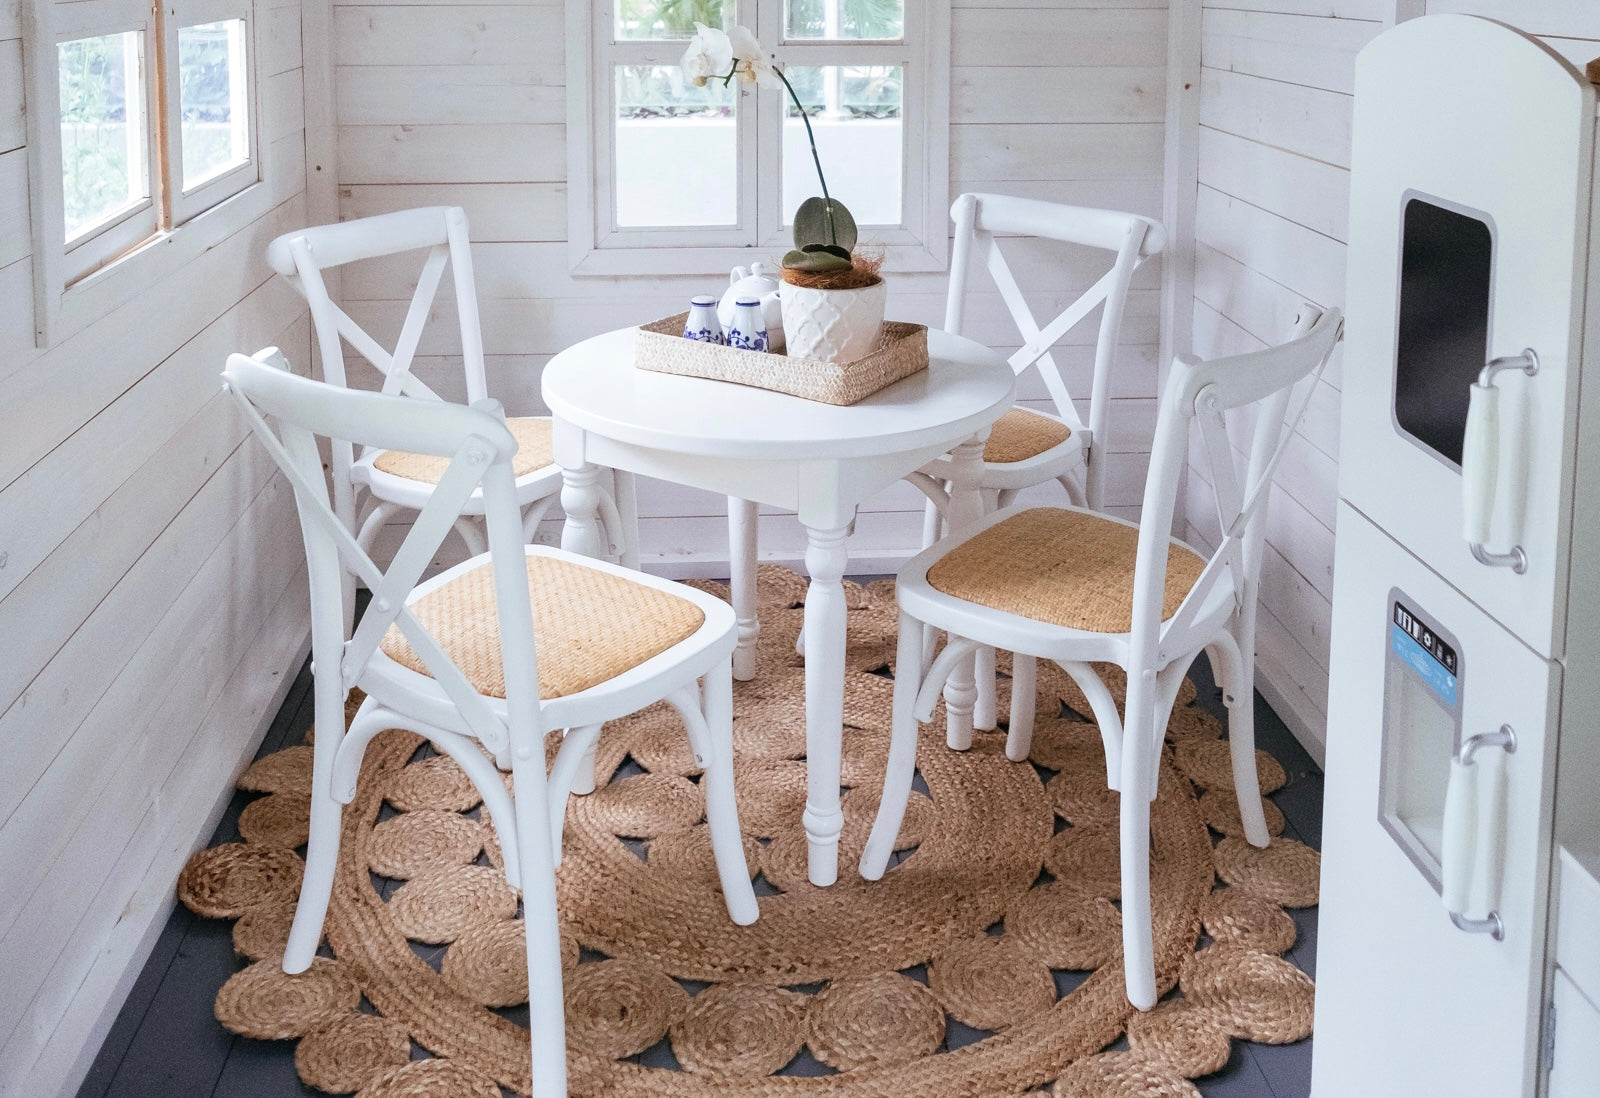 Kids Hamptons style cross back chairs in white and rattan sit around kids white round dining table inside timber cubby house